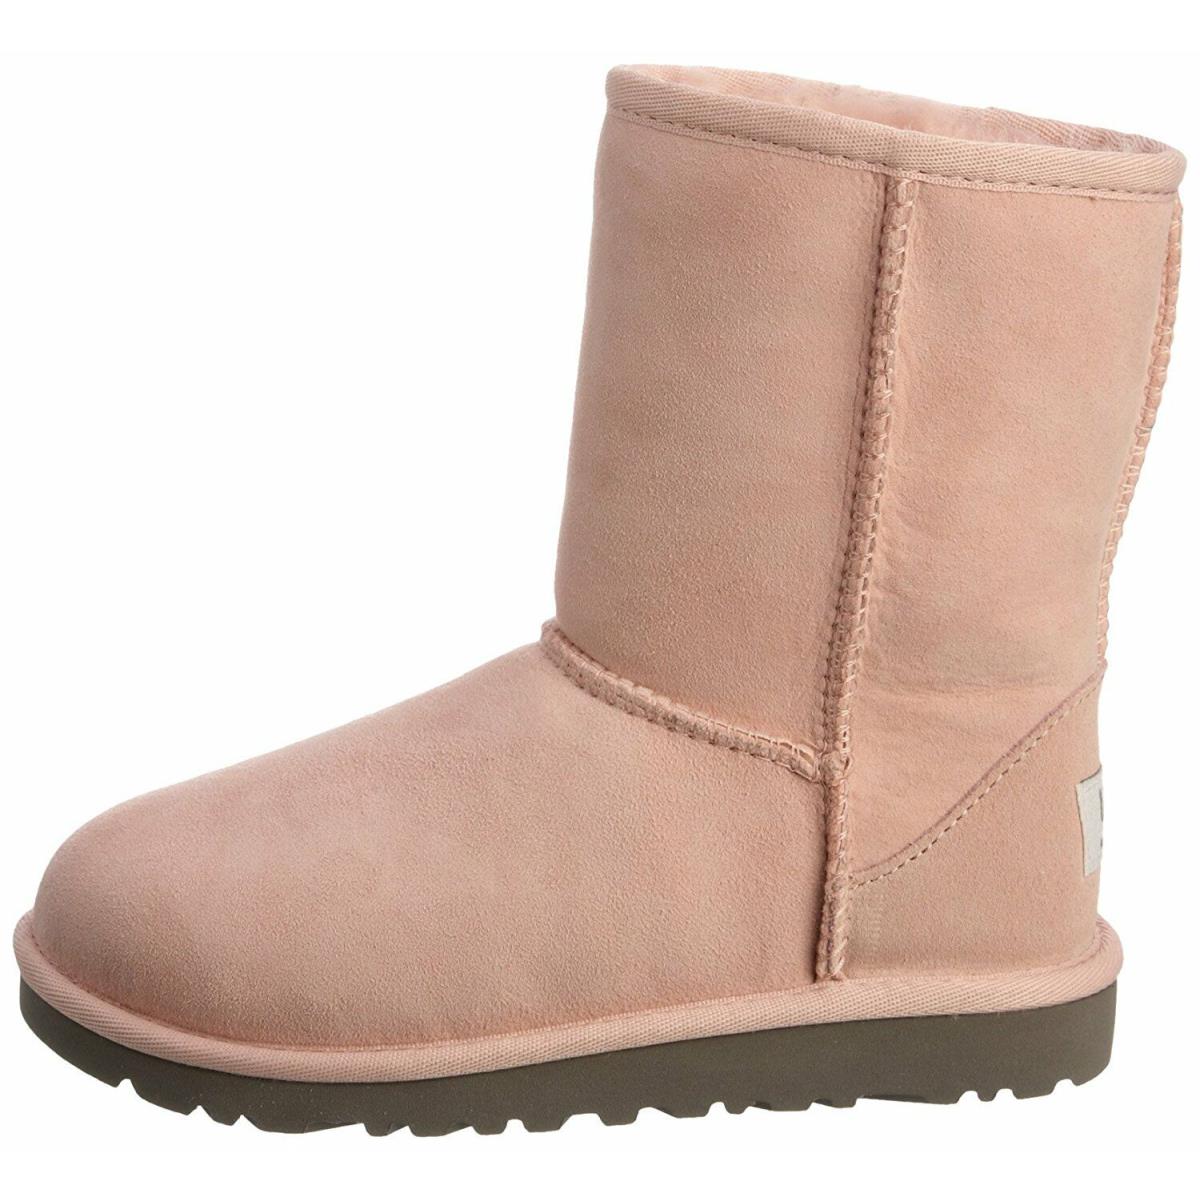 Ugg Classic Short Suede Boots Big Kids Toddler 5251T Bpnk Baby Pink Size 8 - Pink